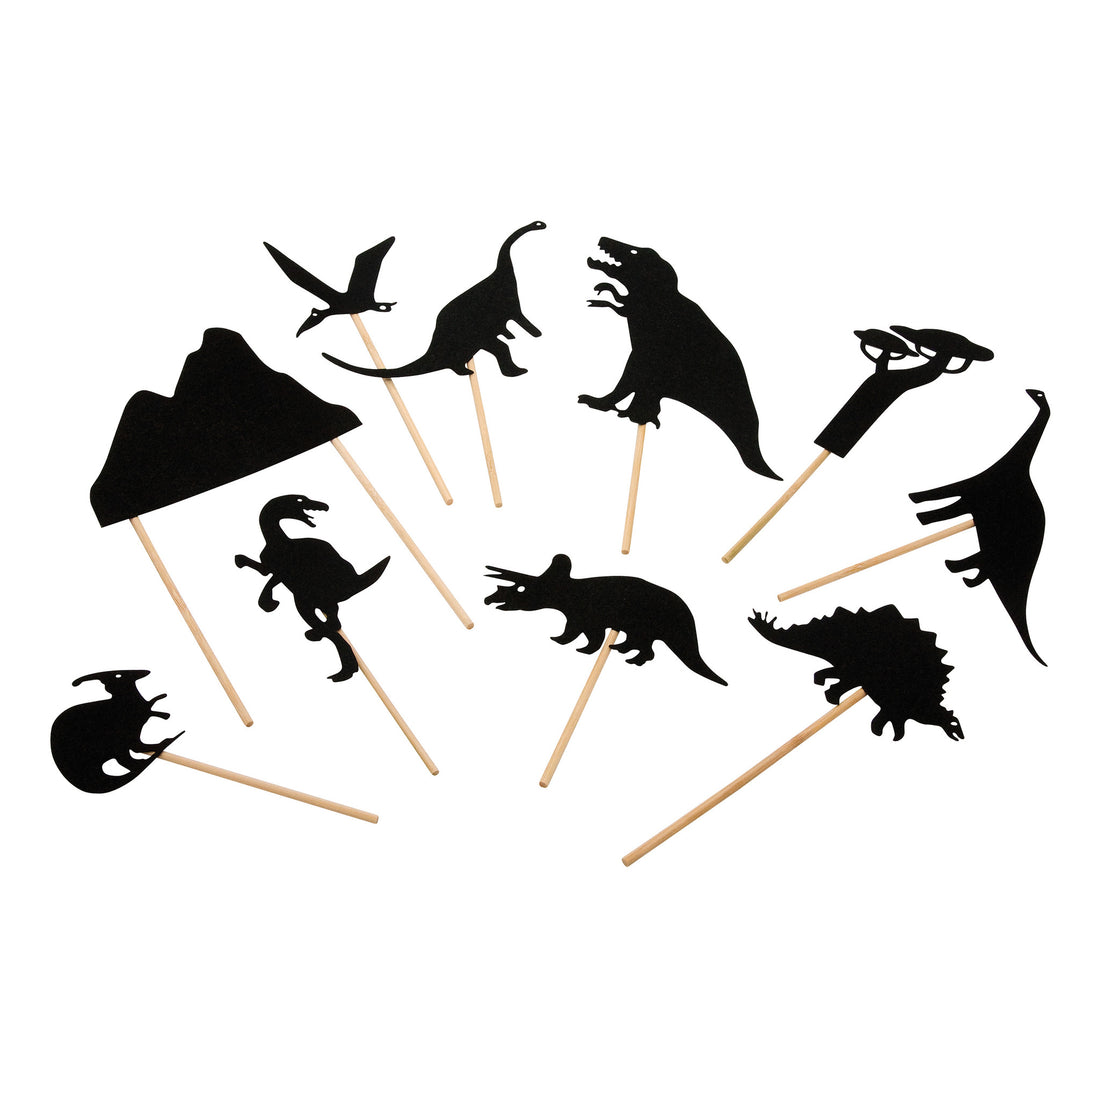 moulin-roty-dinosaur-shadow-puppets-play-games-shadow-puppets-kid-moul-711014-01